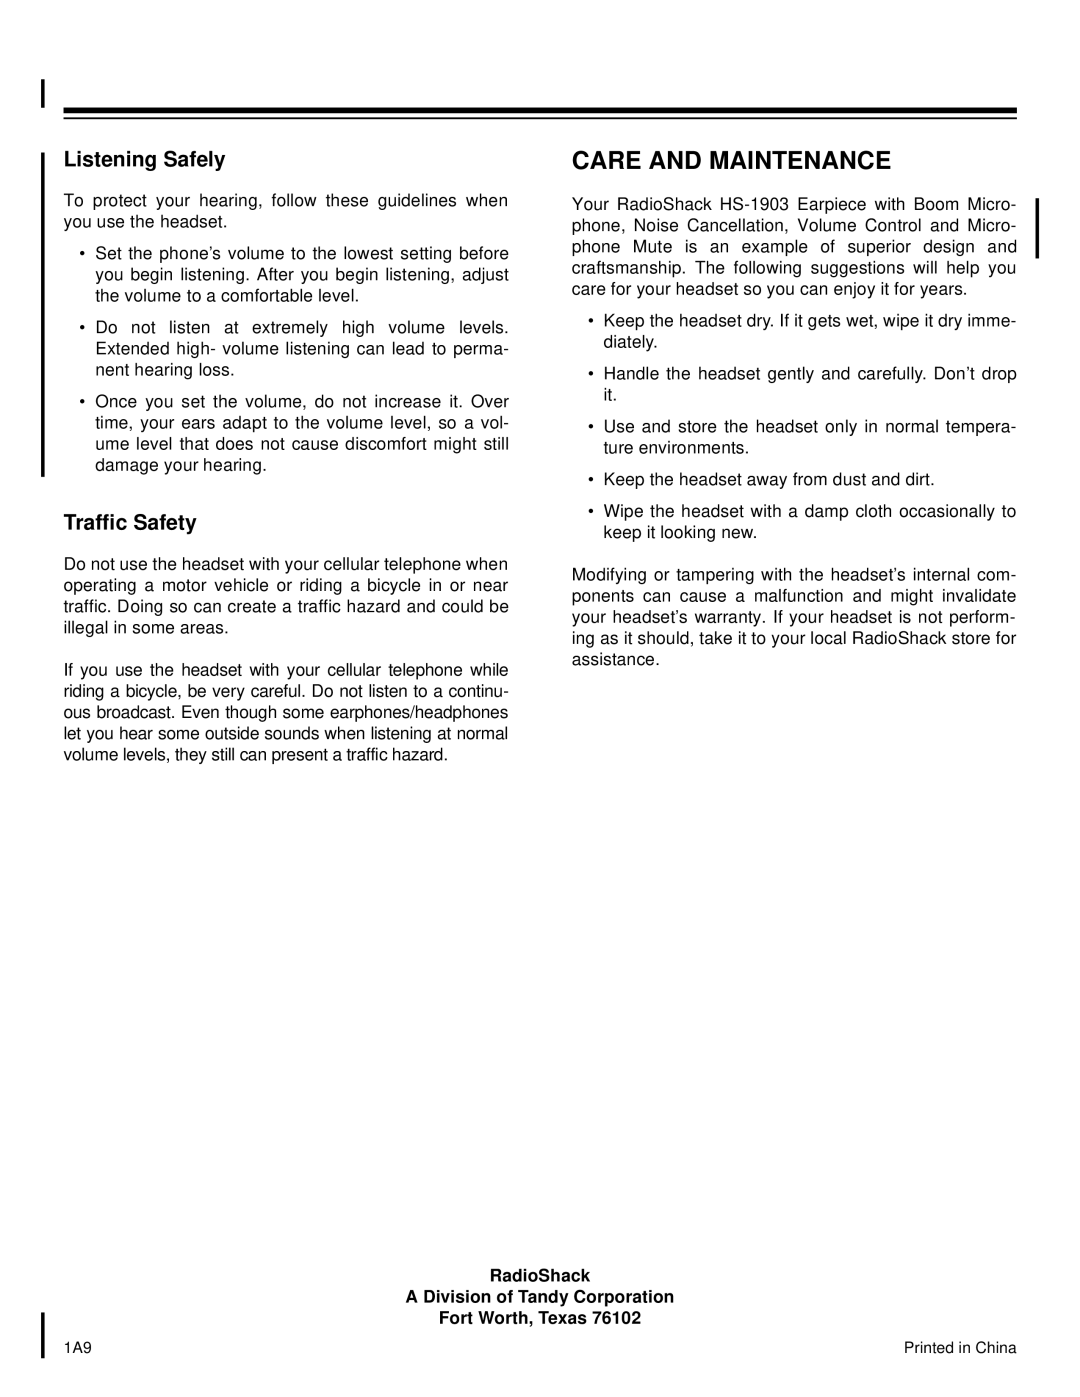 Radio Shack HS-1903 manual Care And Maintenance, Listening Safely, Traffic Safety 